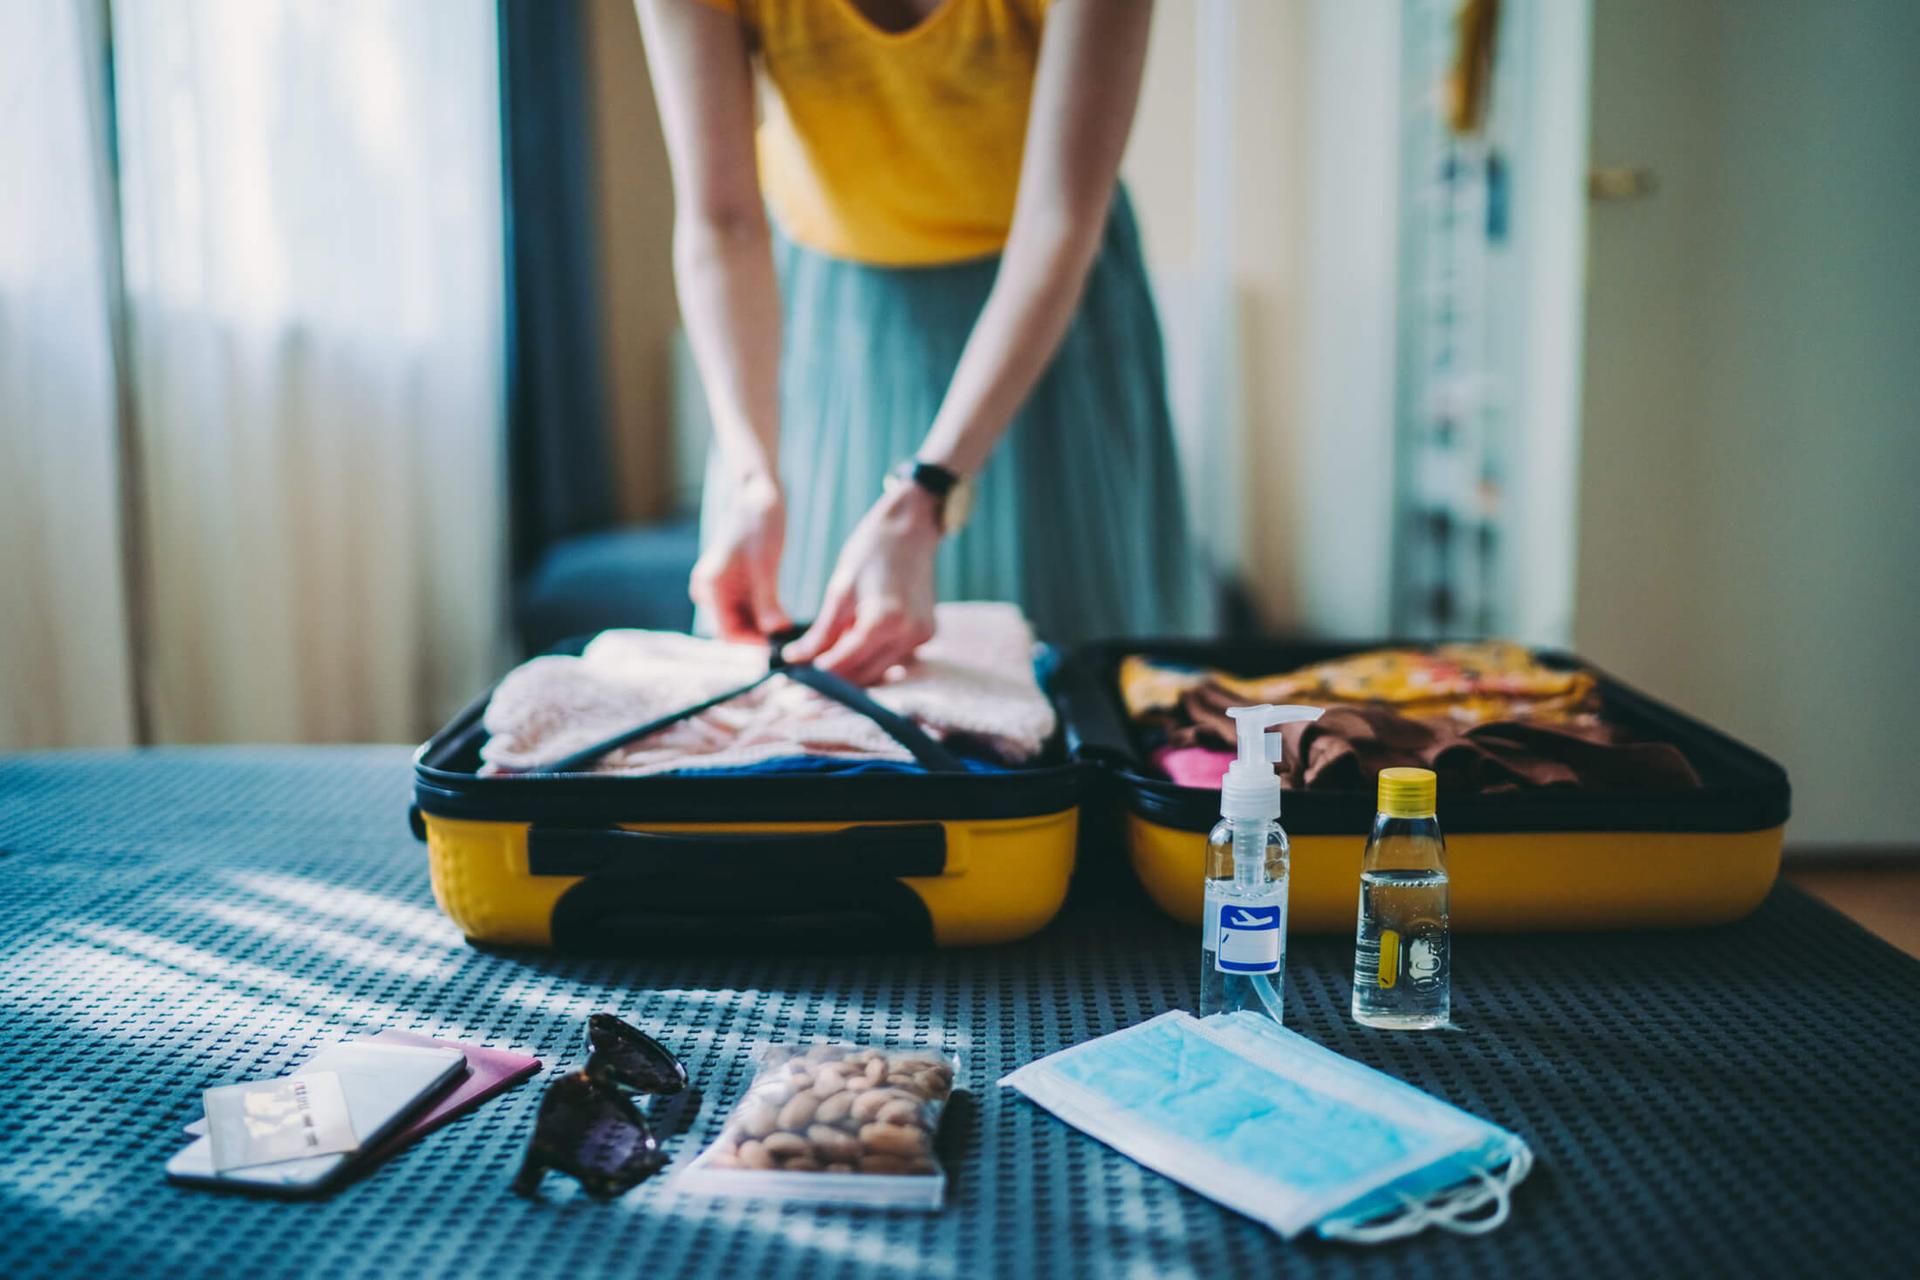 A traveler packing their bag on their bed